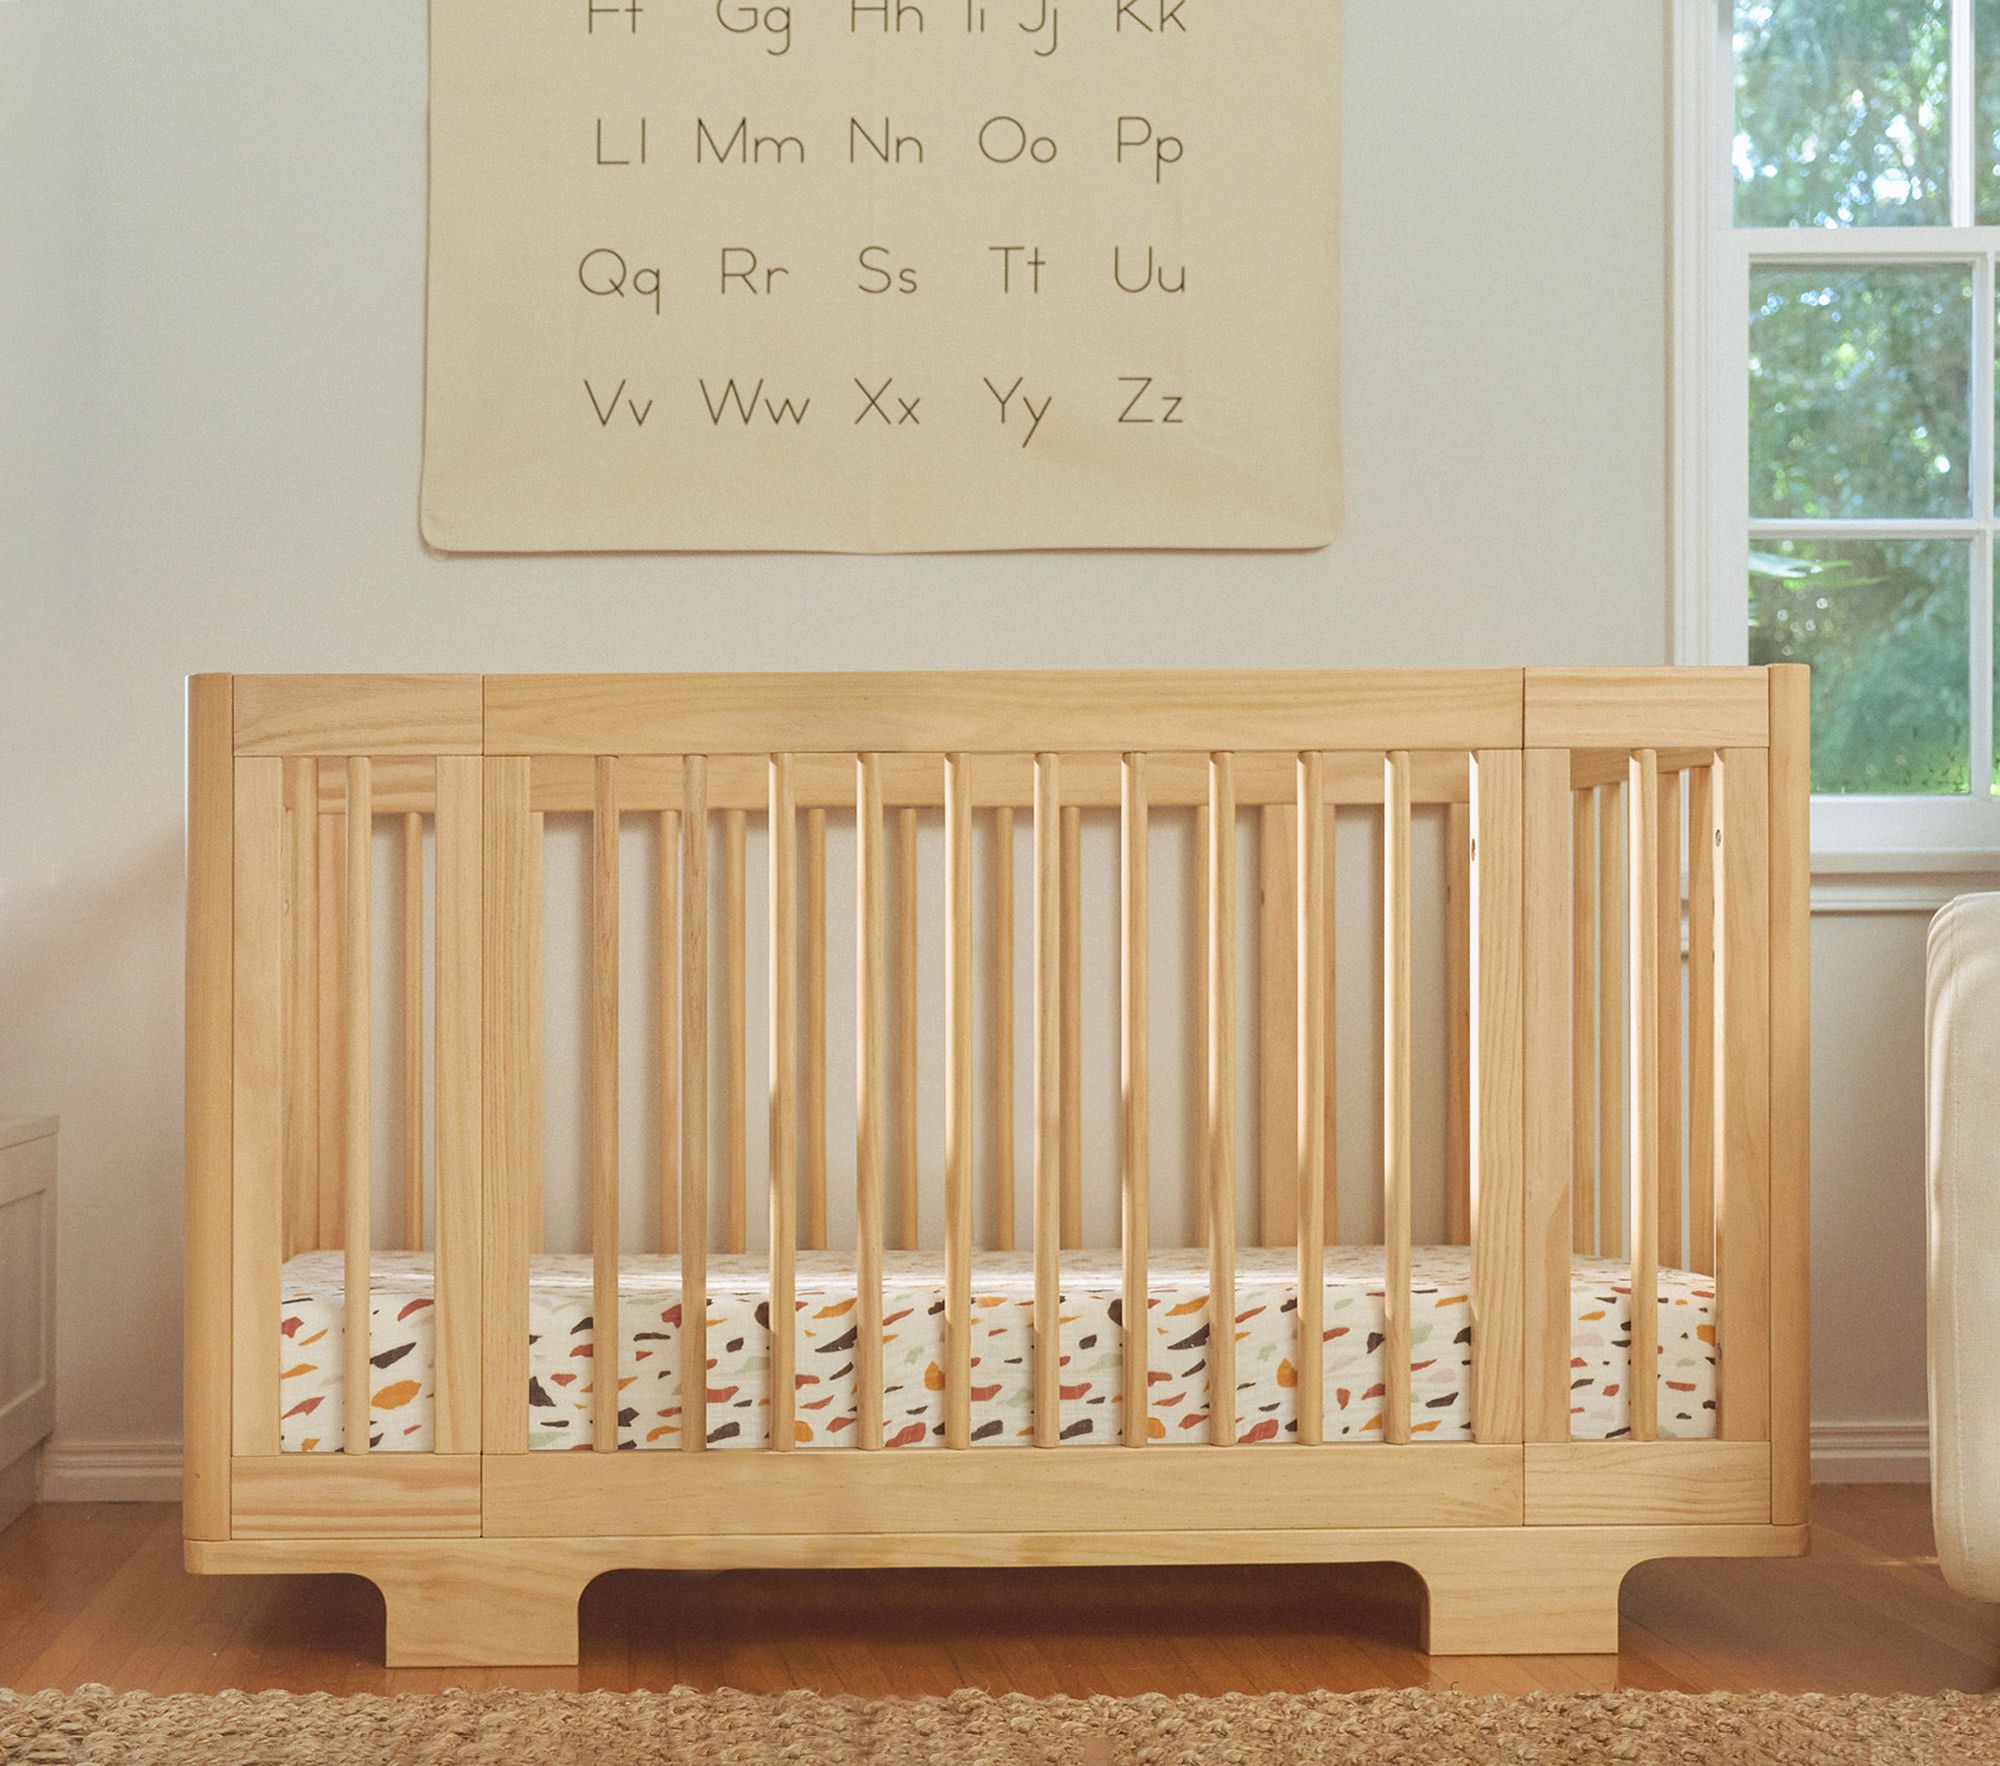 The Babyletto Yuzu 8-in-1 Convertible Crib is eco-friendly because it grows with your child through each stage of their life.